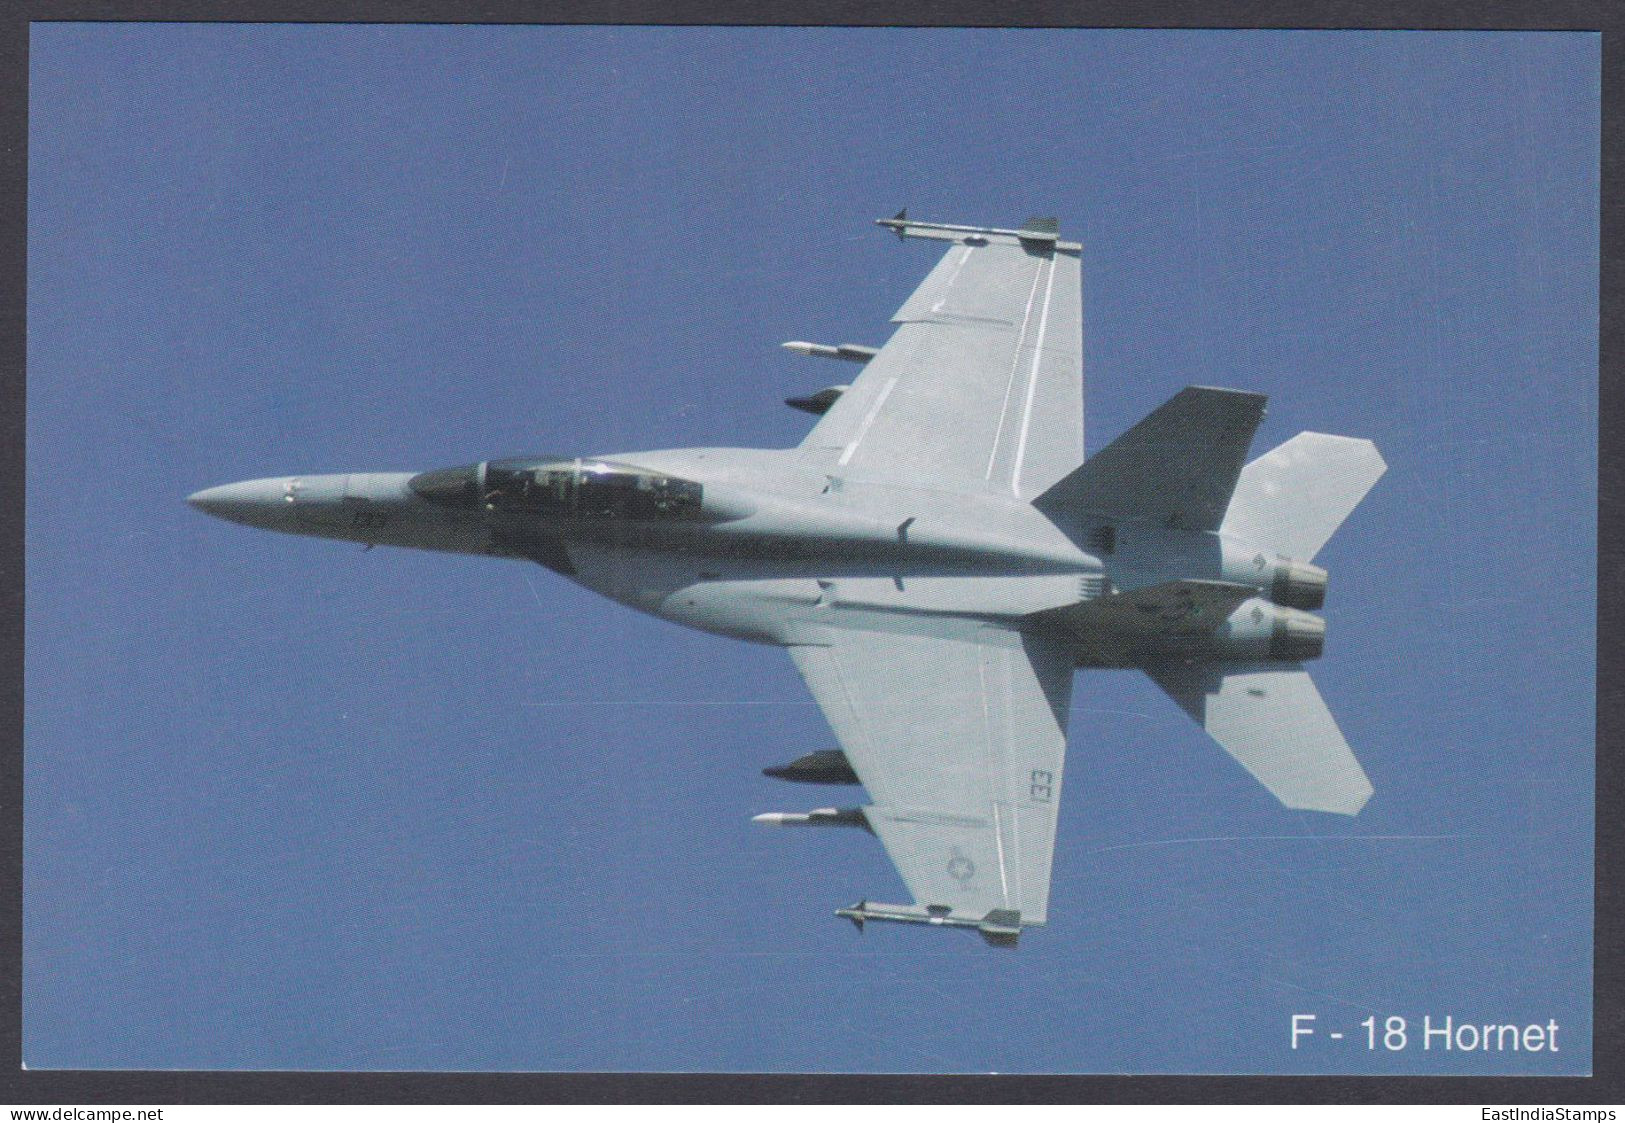 Inde India 2007 Mint Postcard Bangalore Air Show F-18, Hornet, Fighter Jet, Aircraft, Airplane, Aeroplane - India